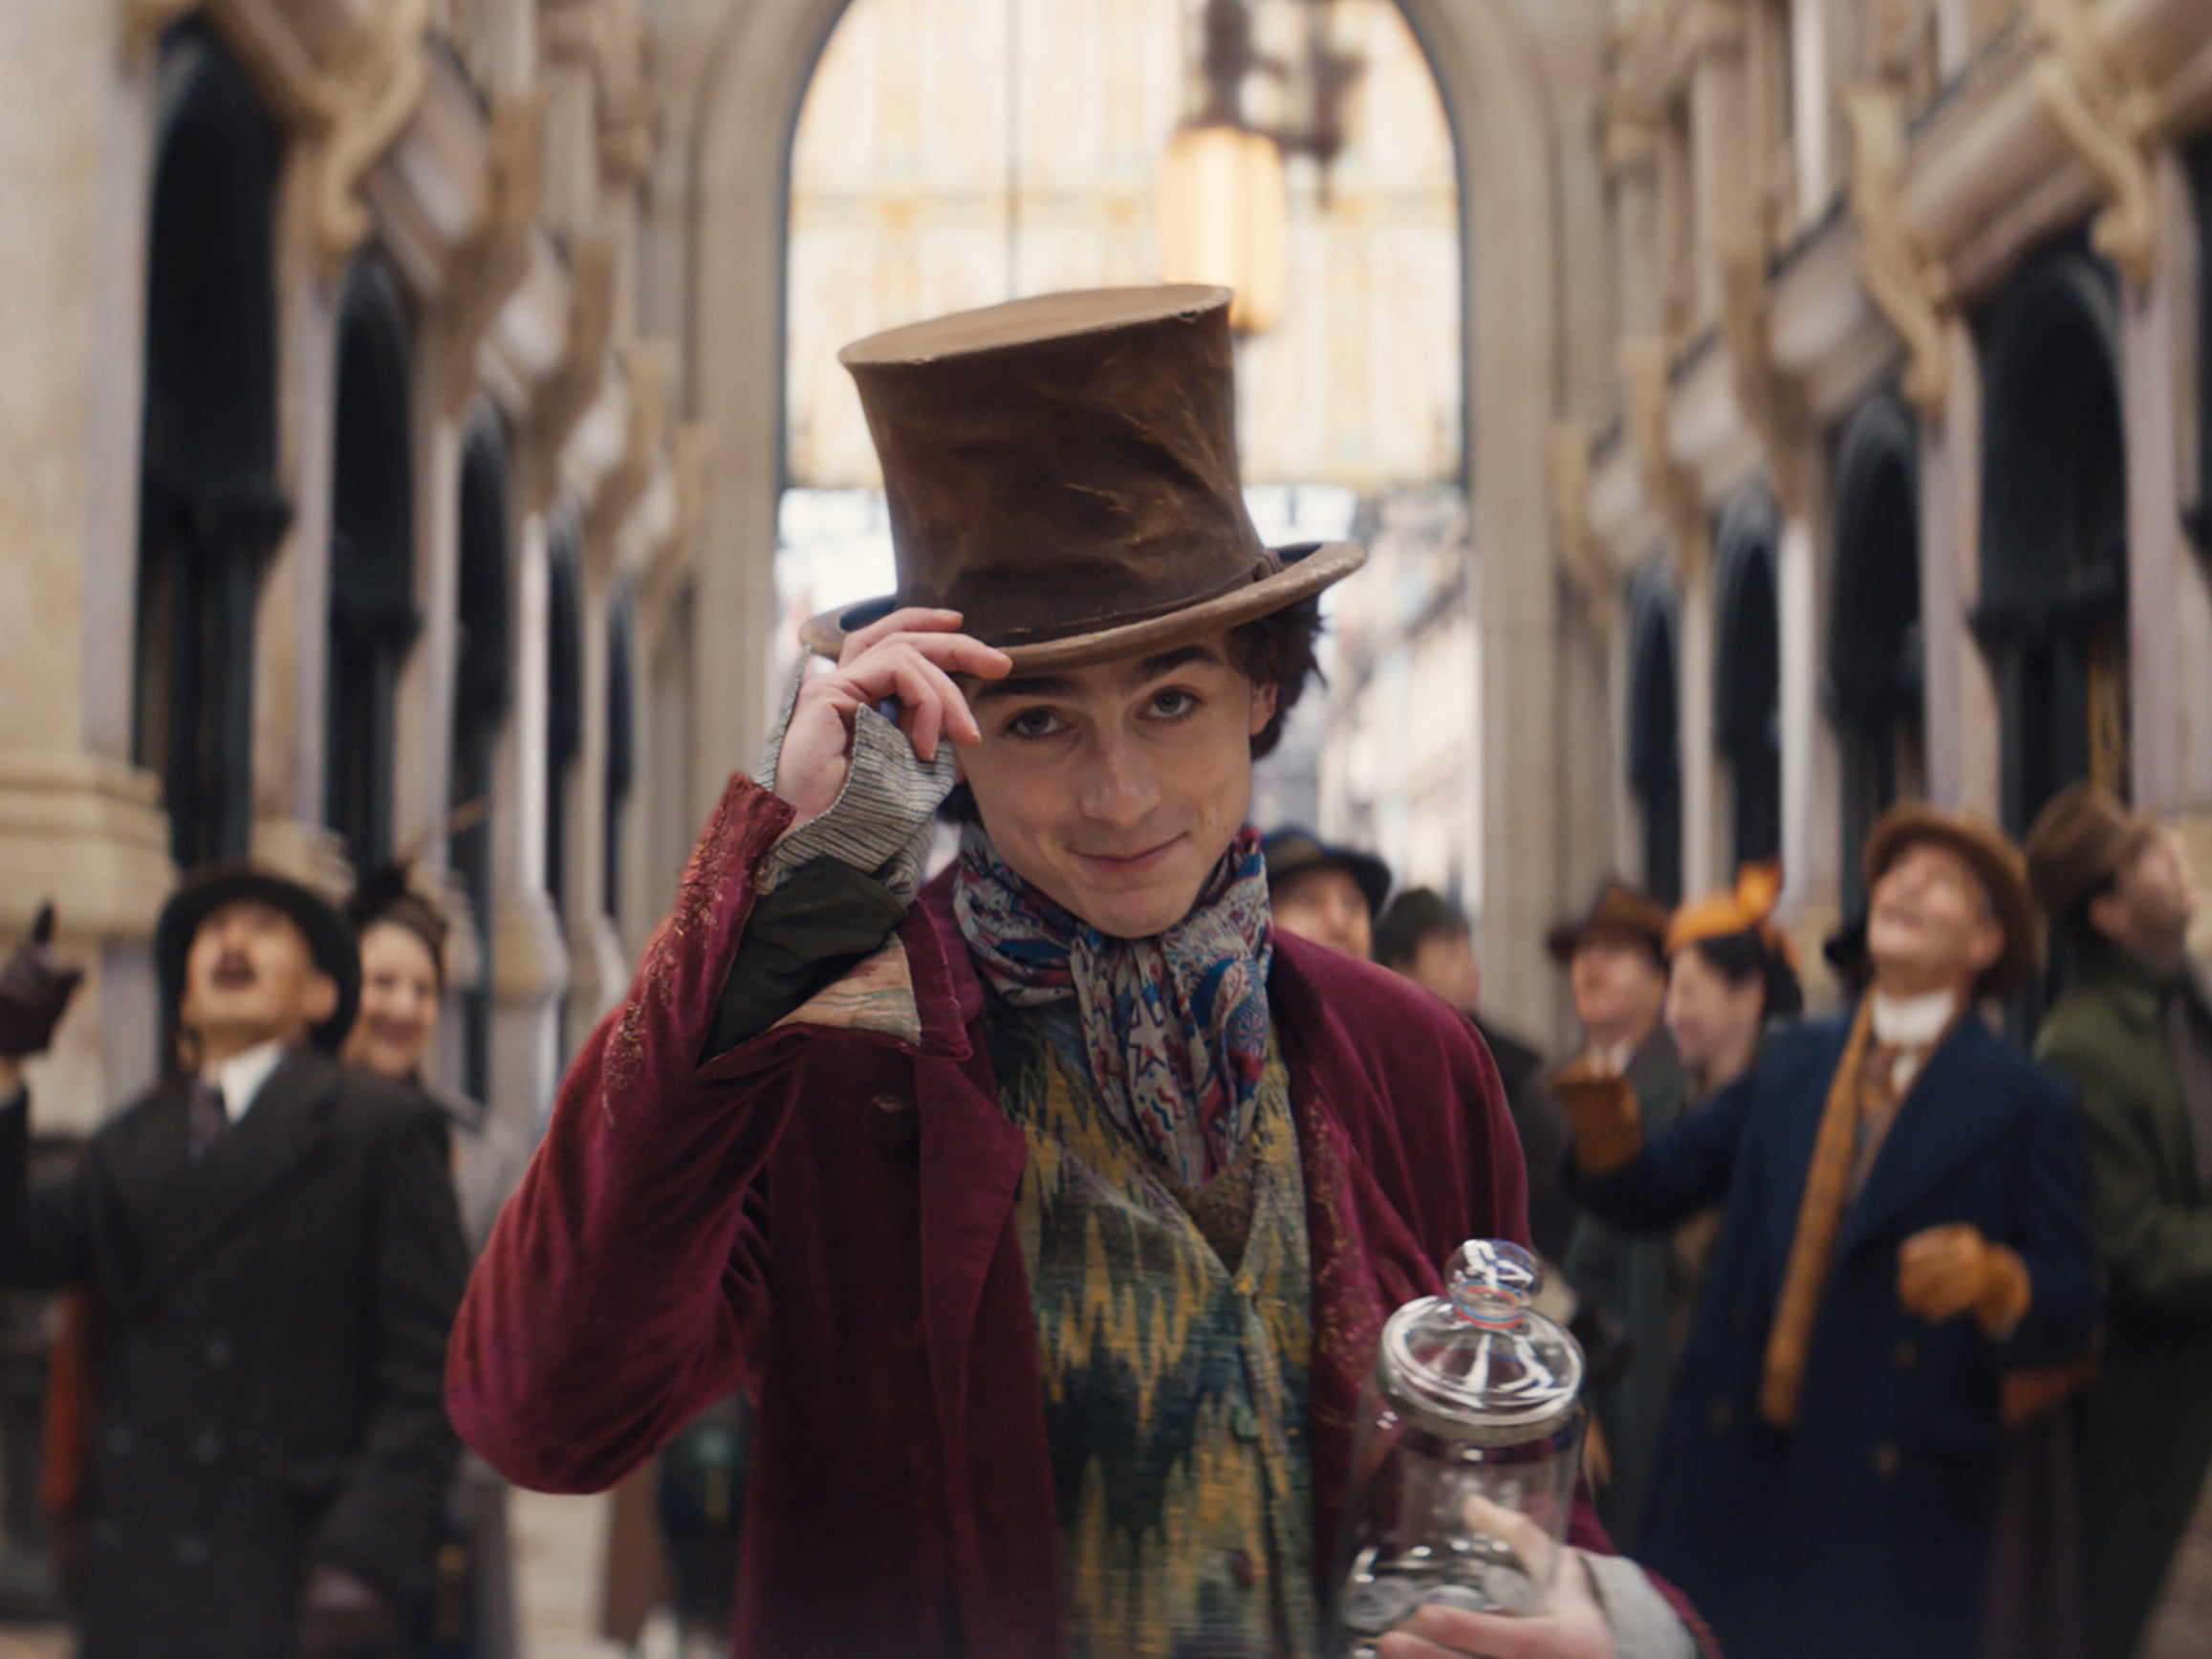 Heartthrob Timothée Chalamet stars as arguably Dahl’s most famous character, Willy Wonka, in a new Warner Bros movie